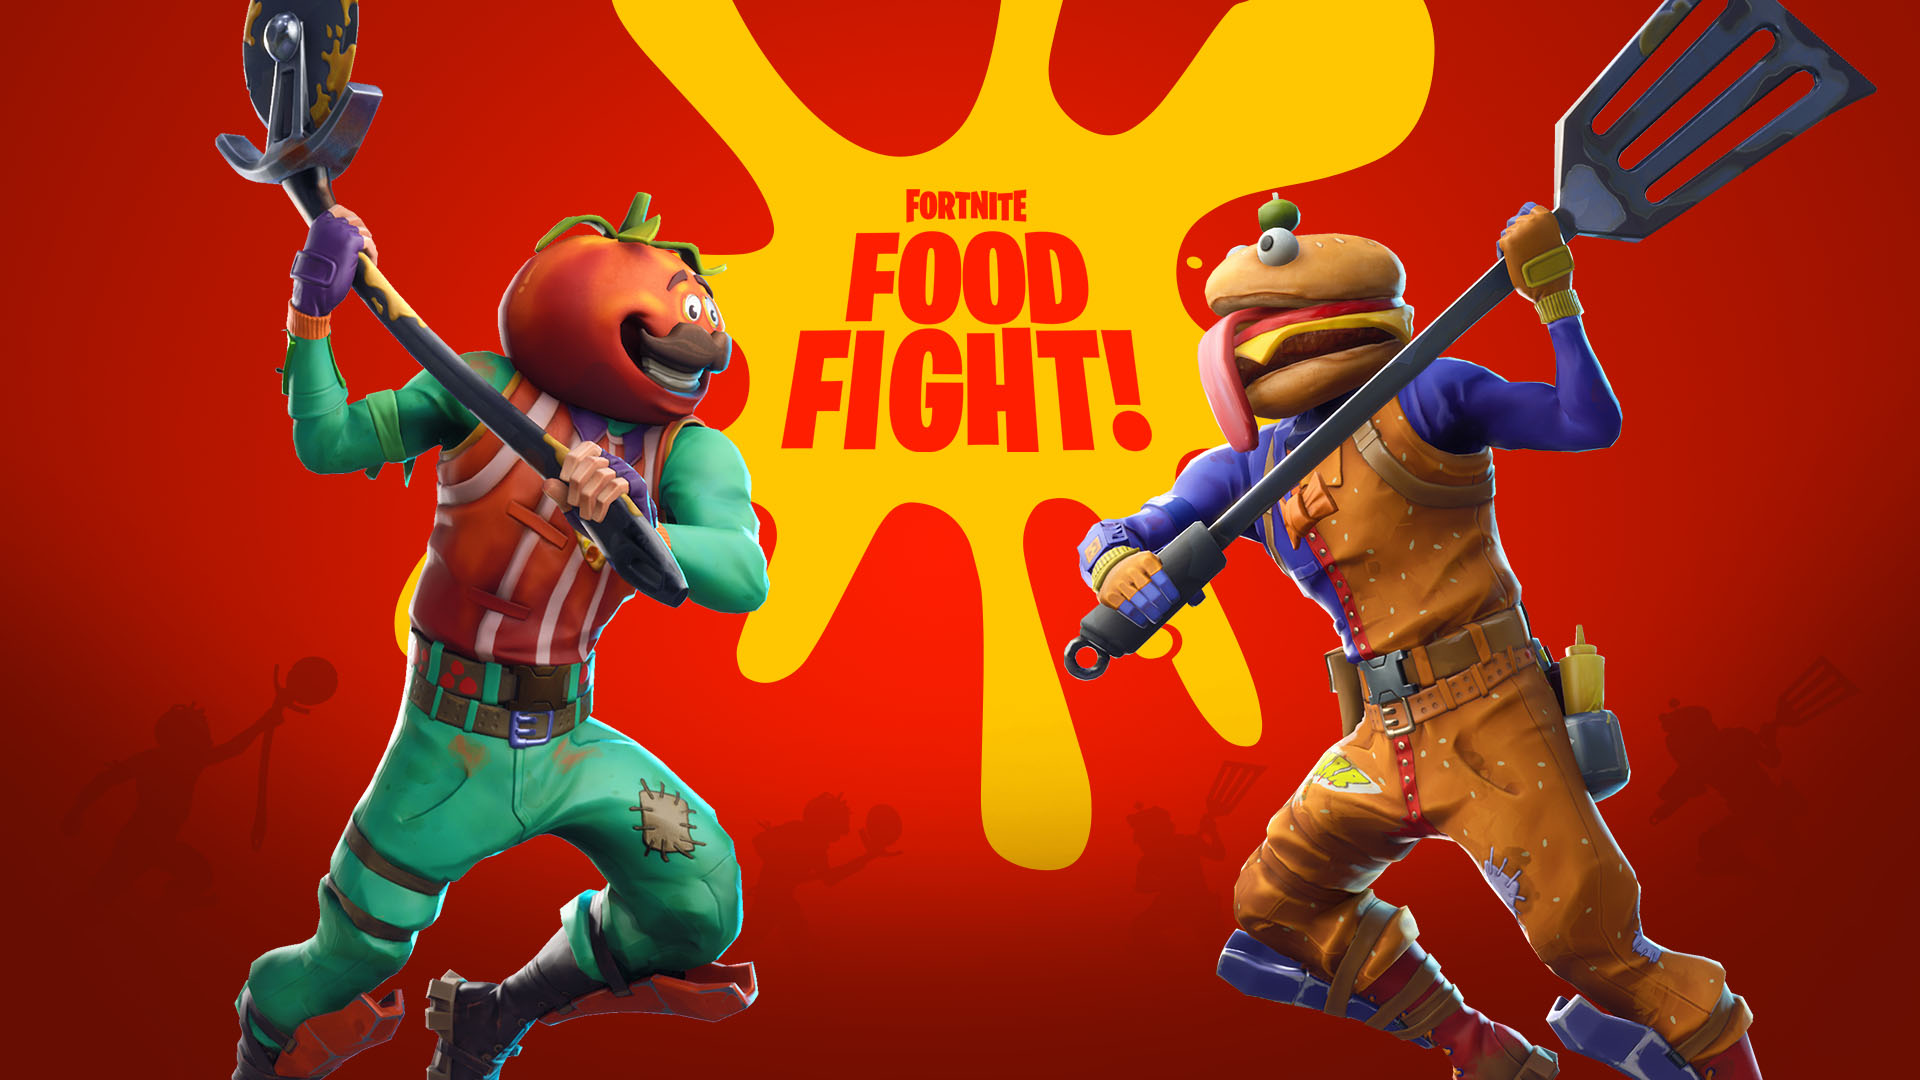 fortnite s food fight ltm receives adjustments to help players feel like they re making more progress - what is that red dot on fortnite